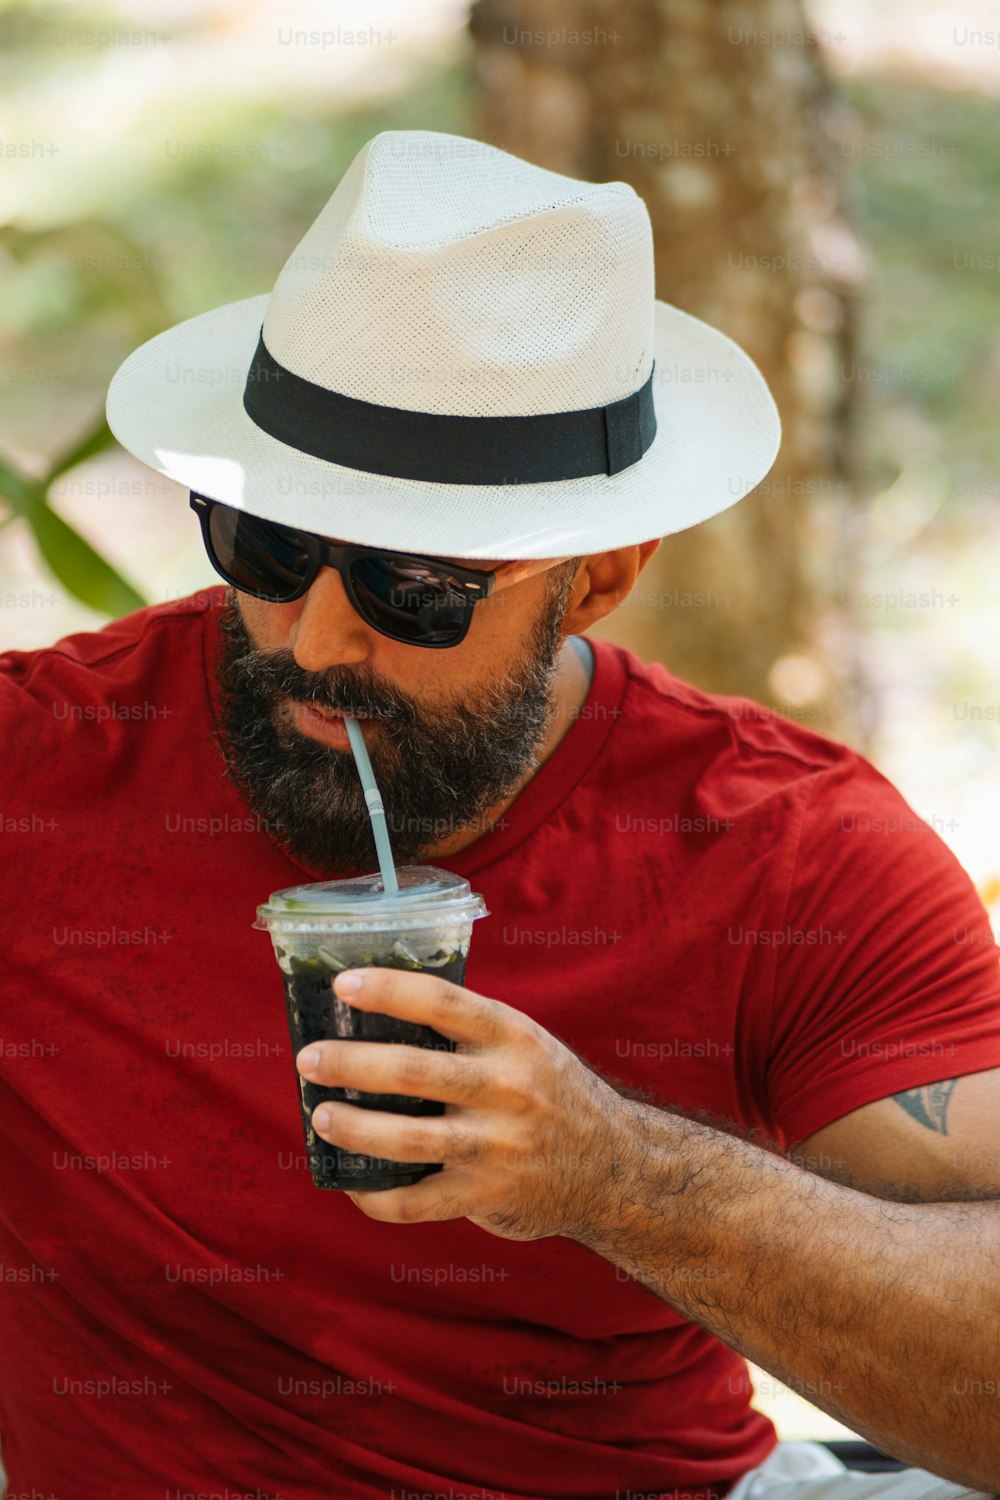 a man with a hat and sunglasses drinking a drink